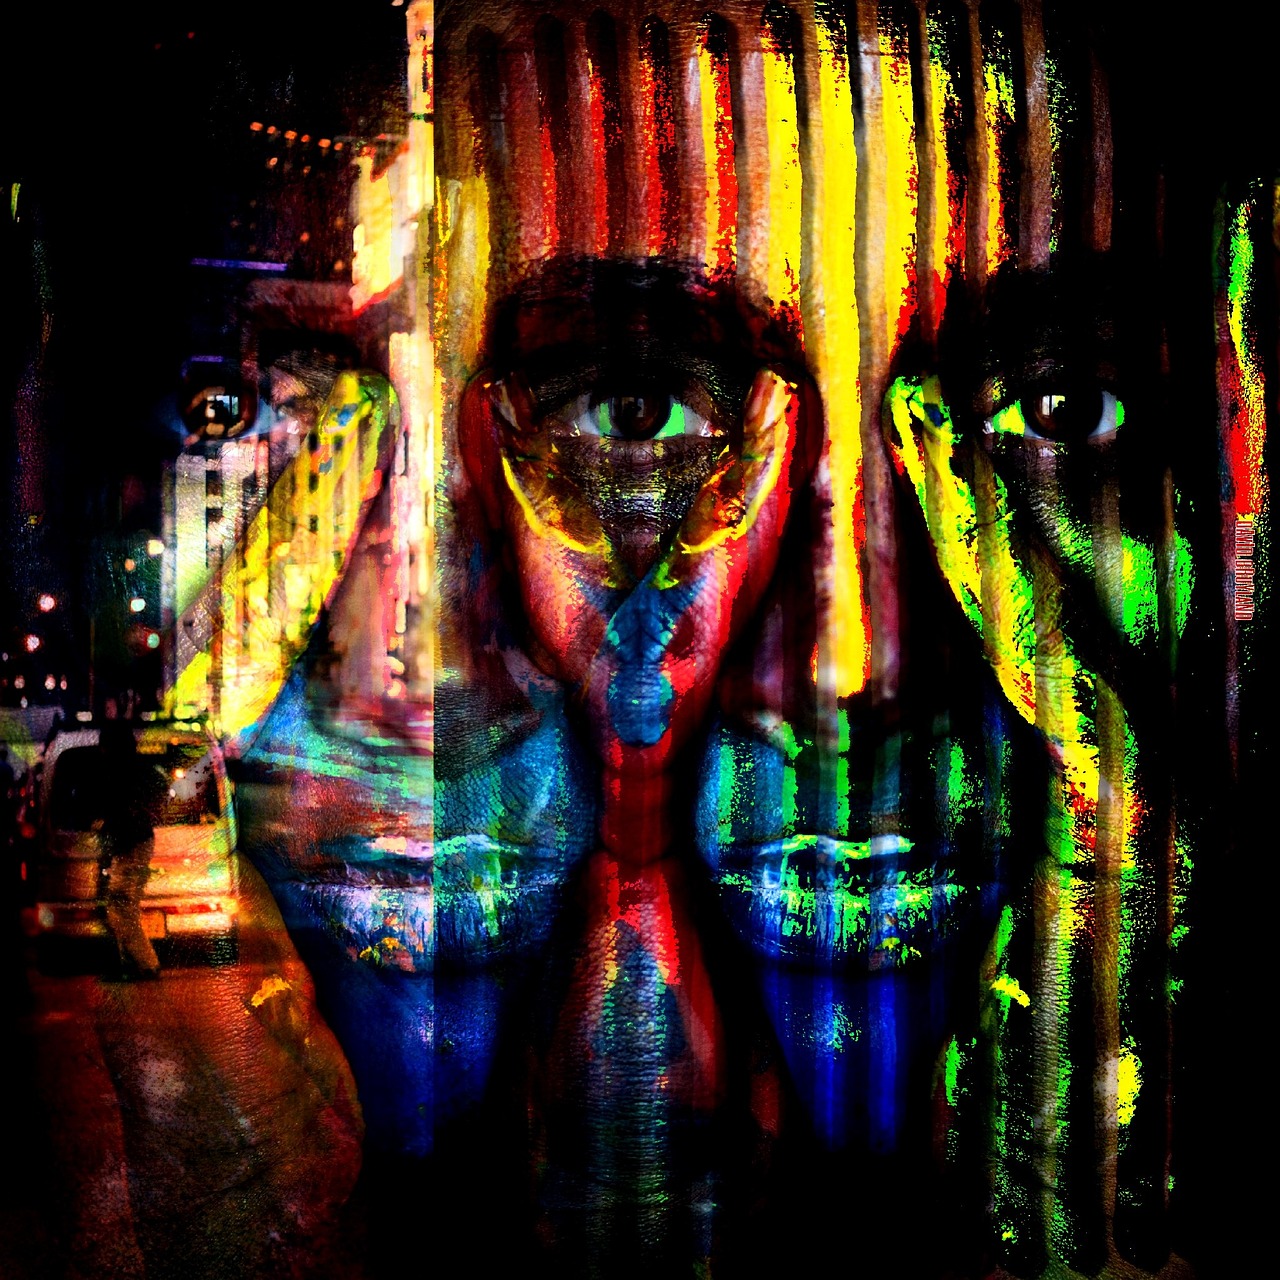 a painting of a man's face on the side of a building, cyberpunk art, inspired by Ed Paschke, hdr refractions, twins, people at night, hi resolution